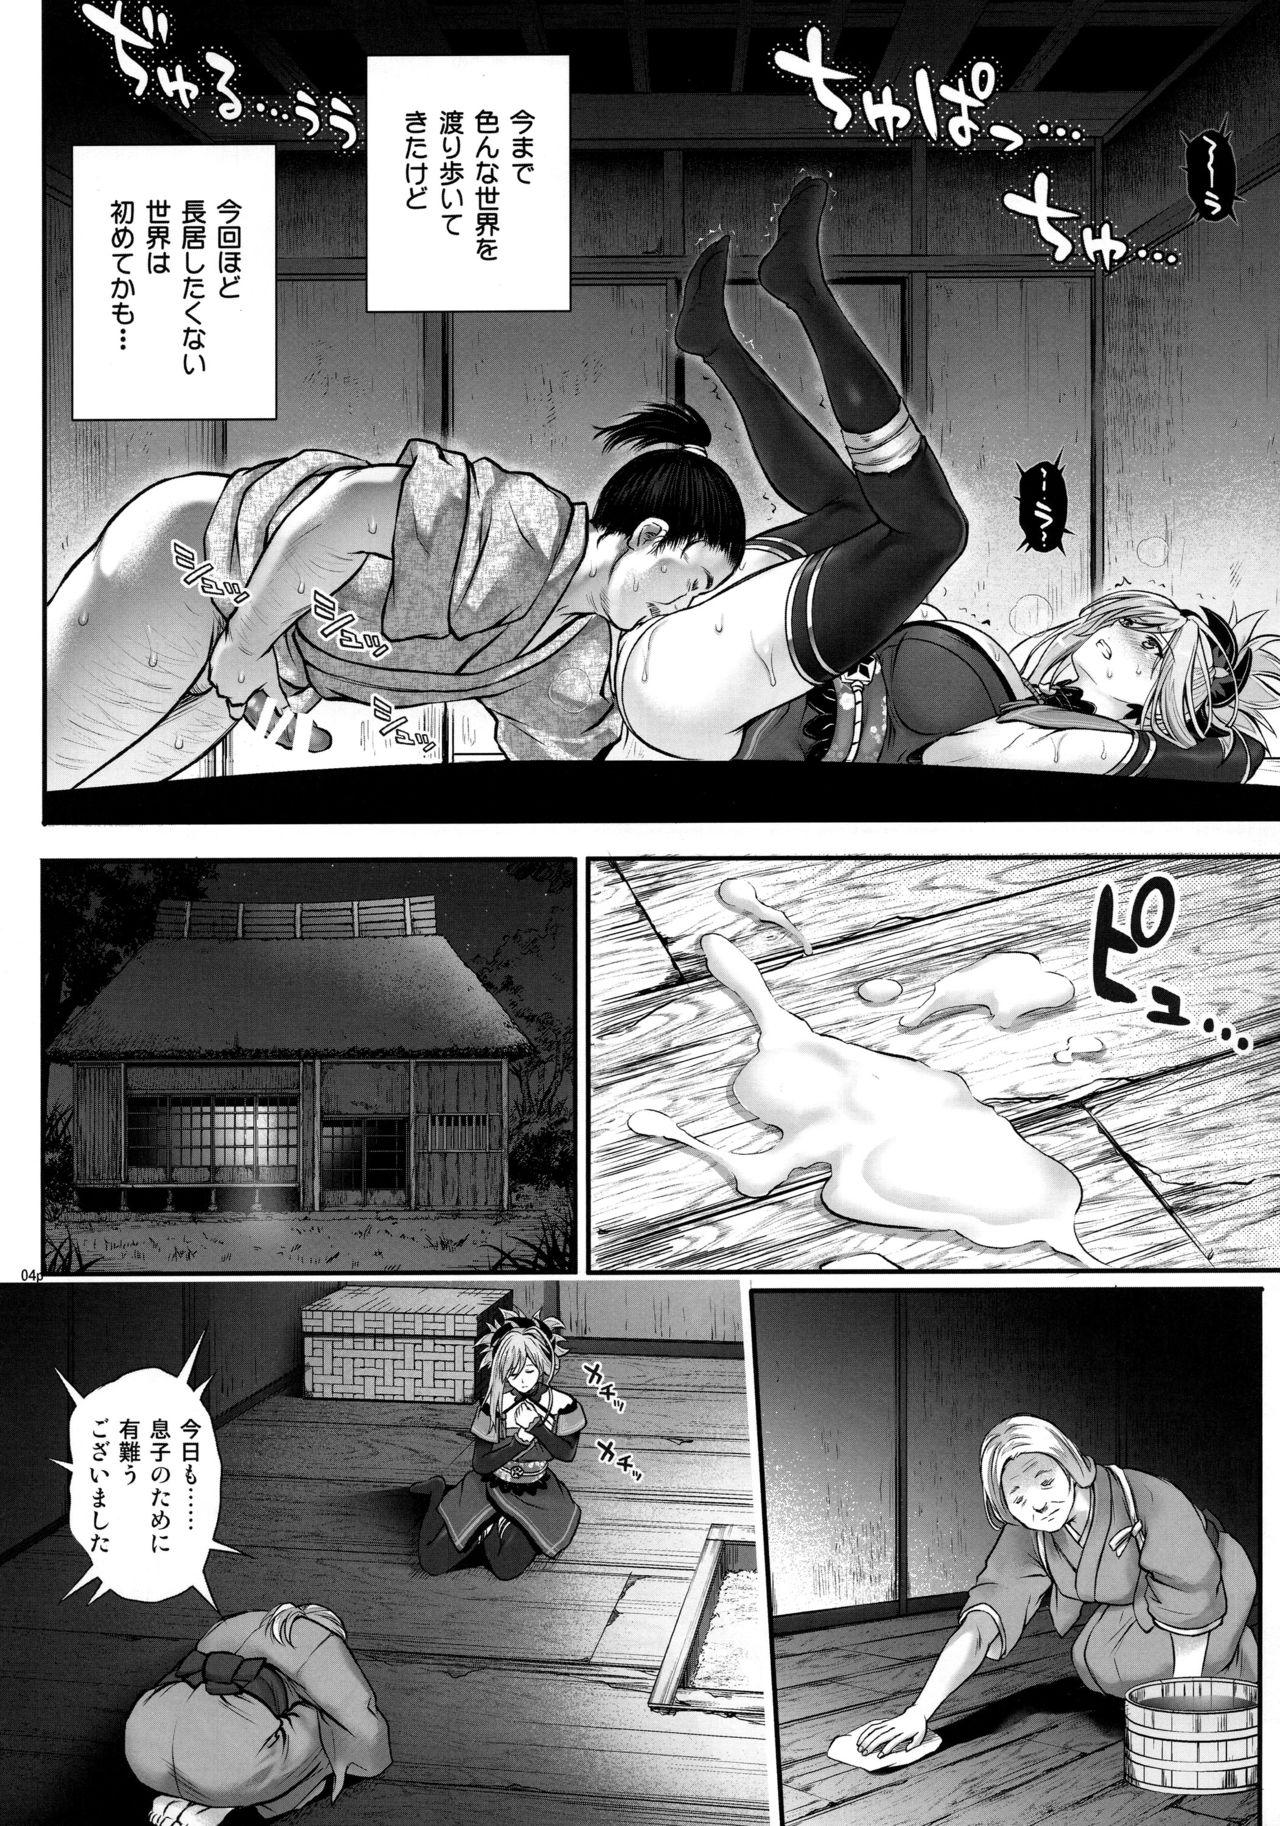 Public T-32 hooollow - Fate grand order Guys - Page 4